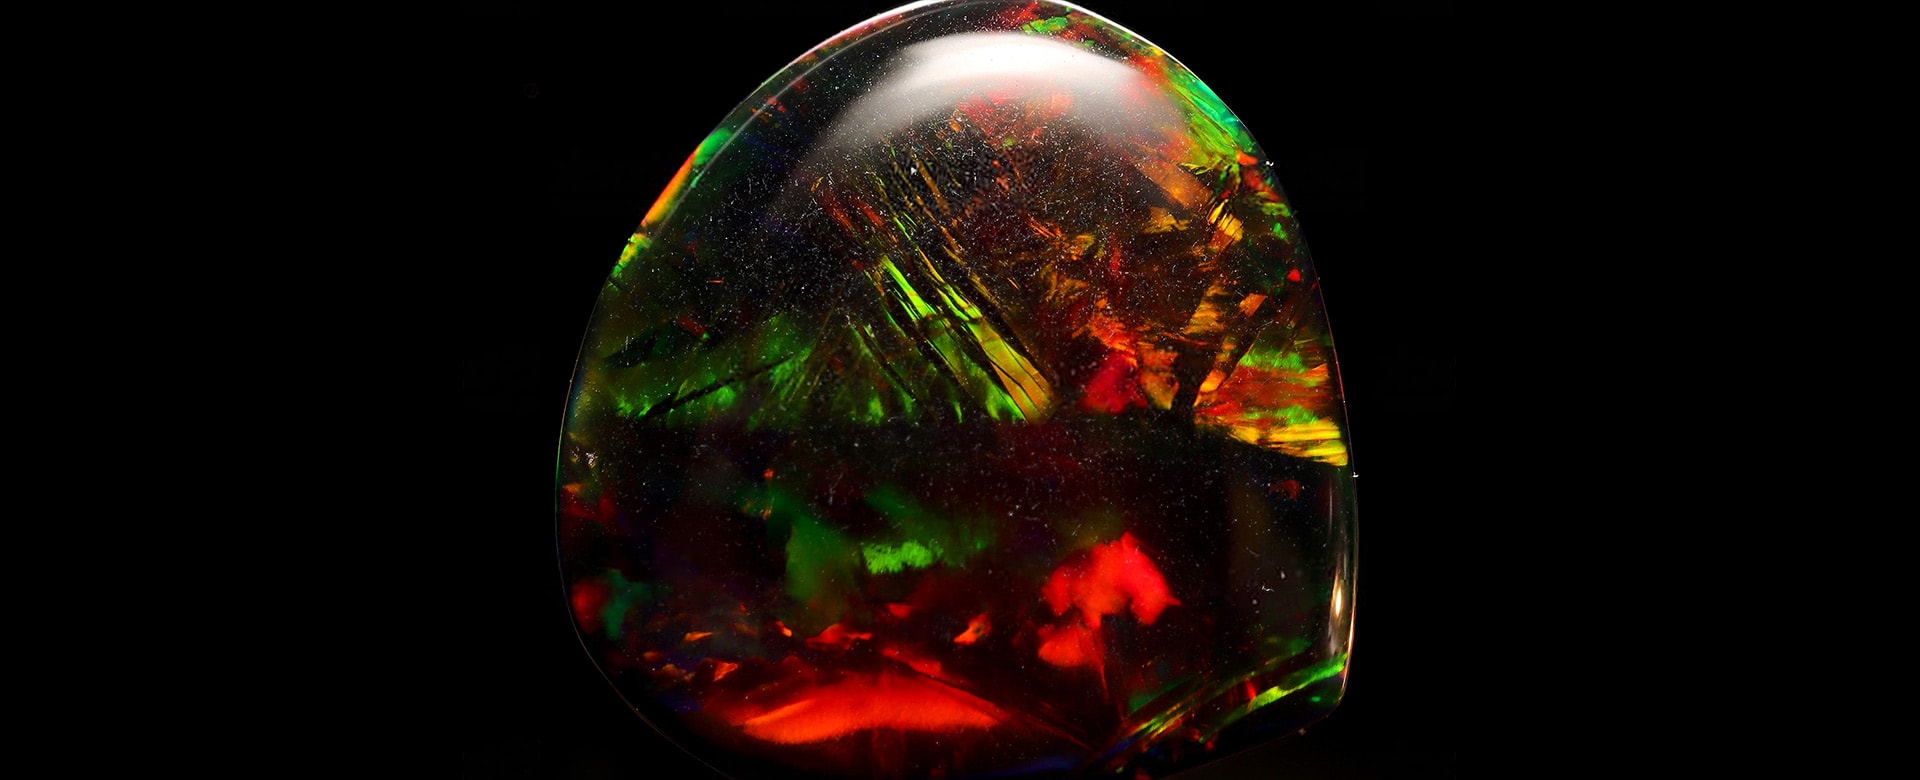 Black Opal Meaning and Properties 1